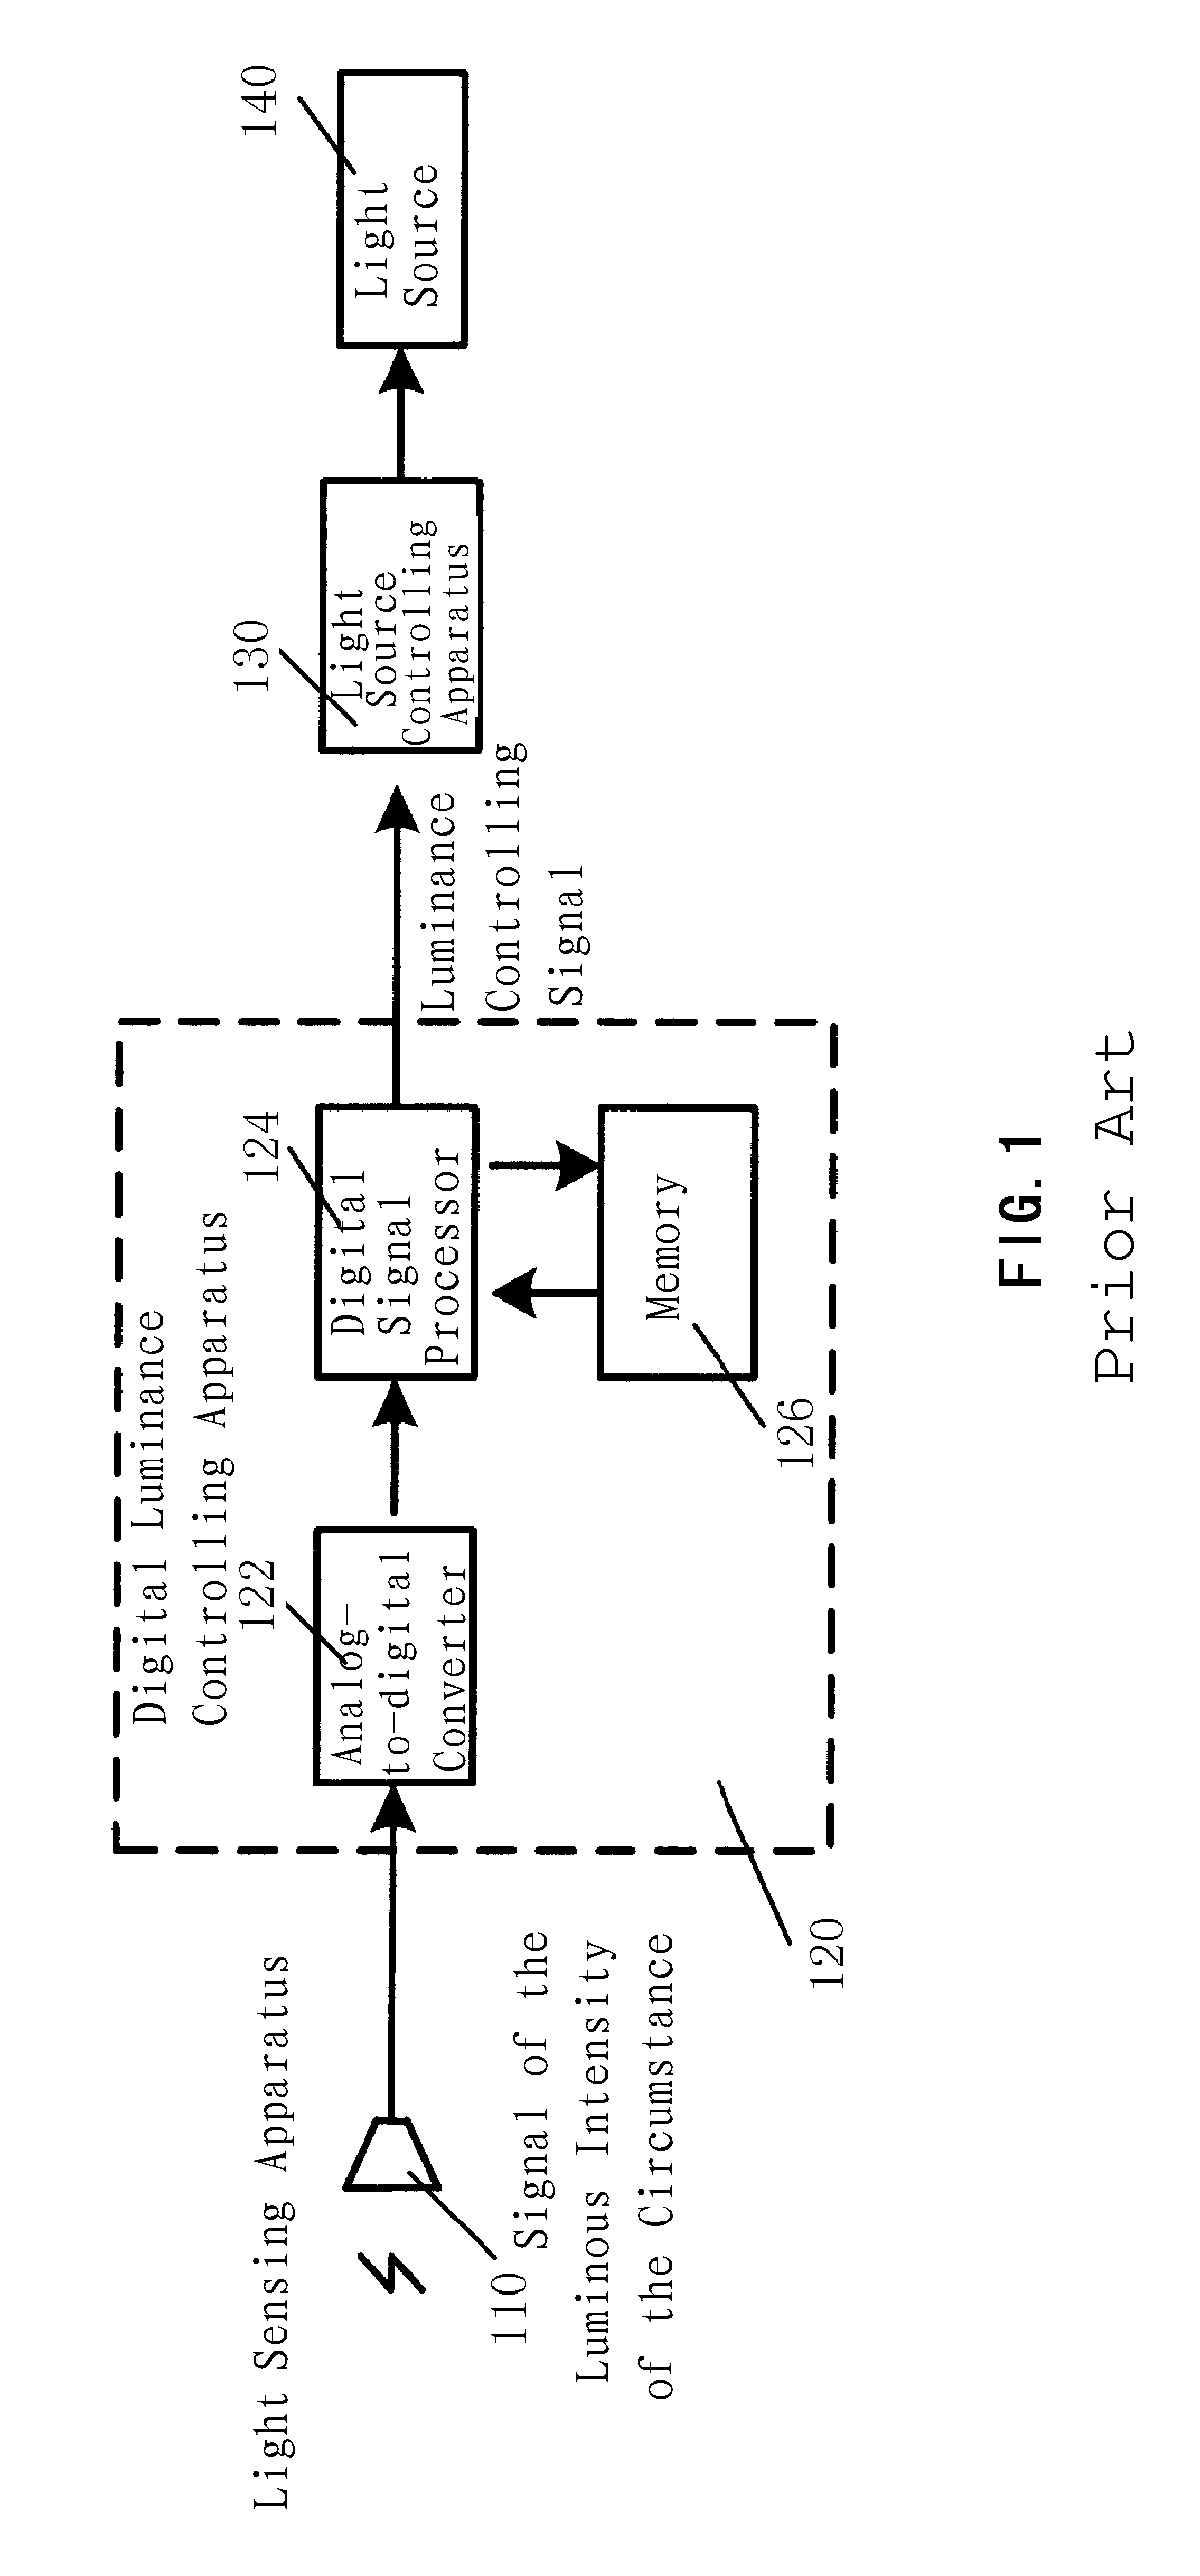 Methods and system for controlling an illuminating apparatus